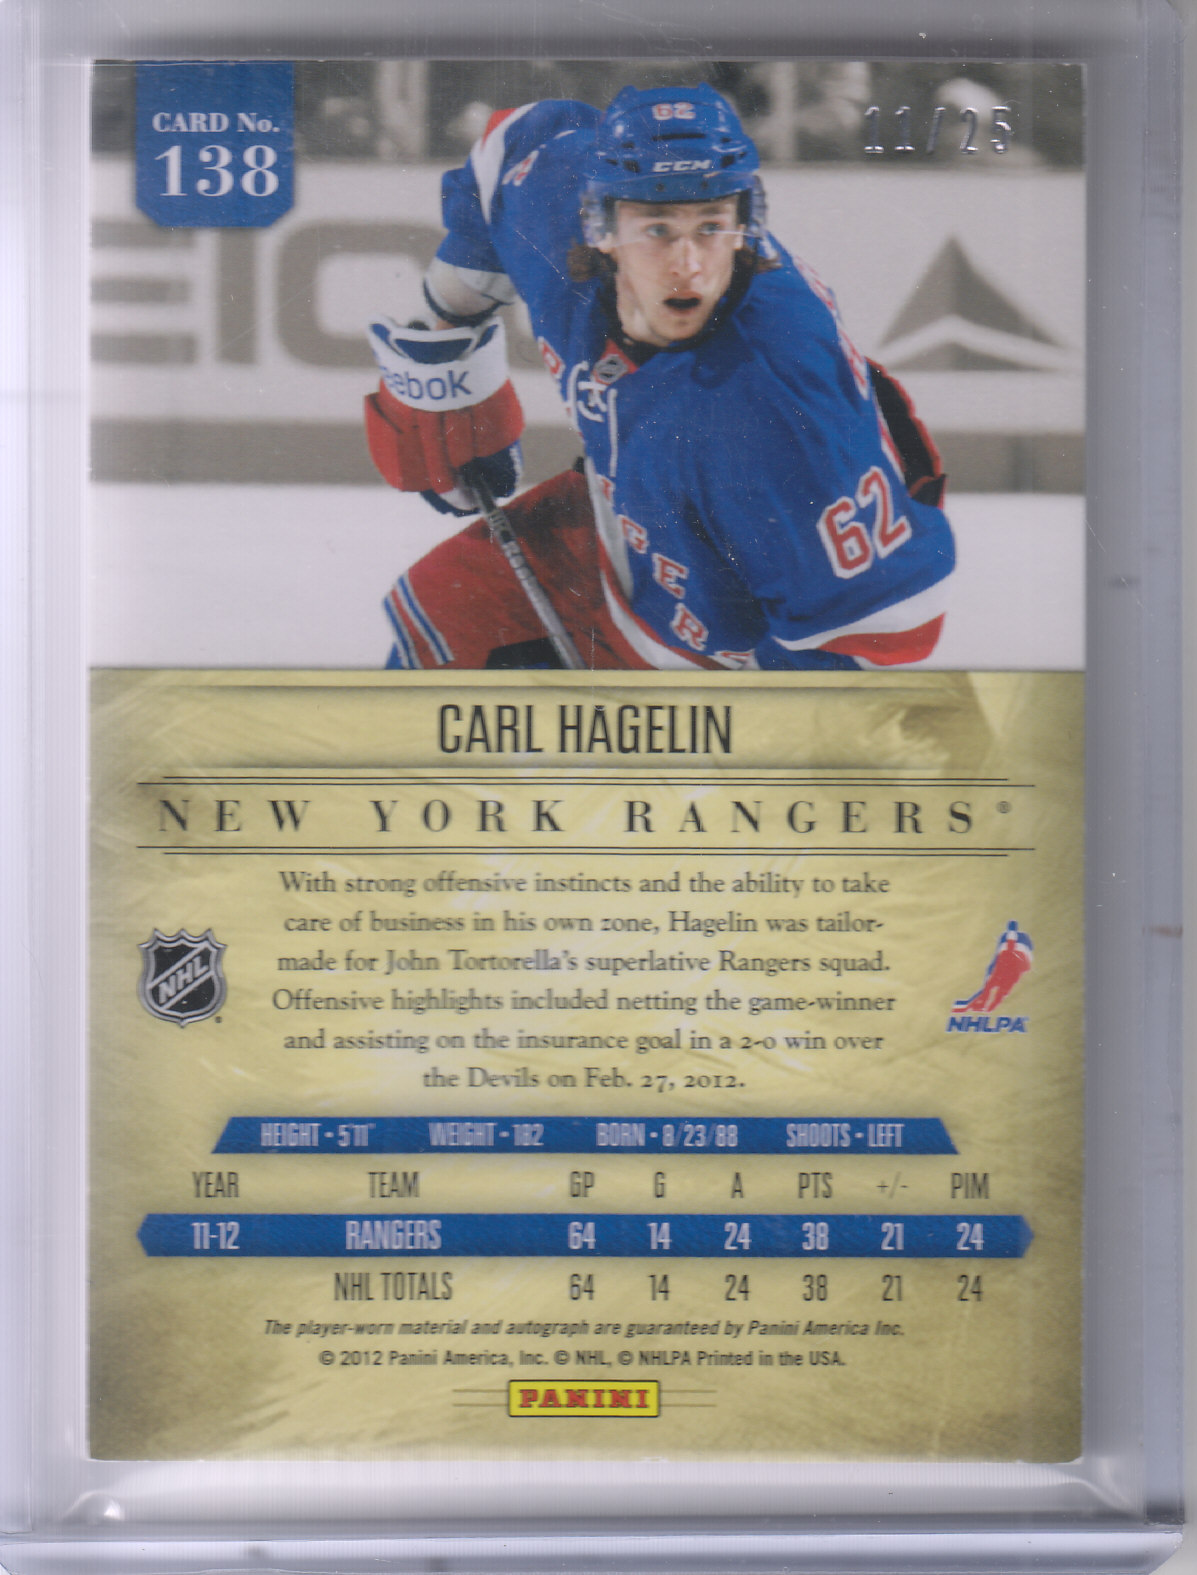 2011-12 Panini Prime Rookies Hologold Patch Autographs #138 Carl Hagelin back image